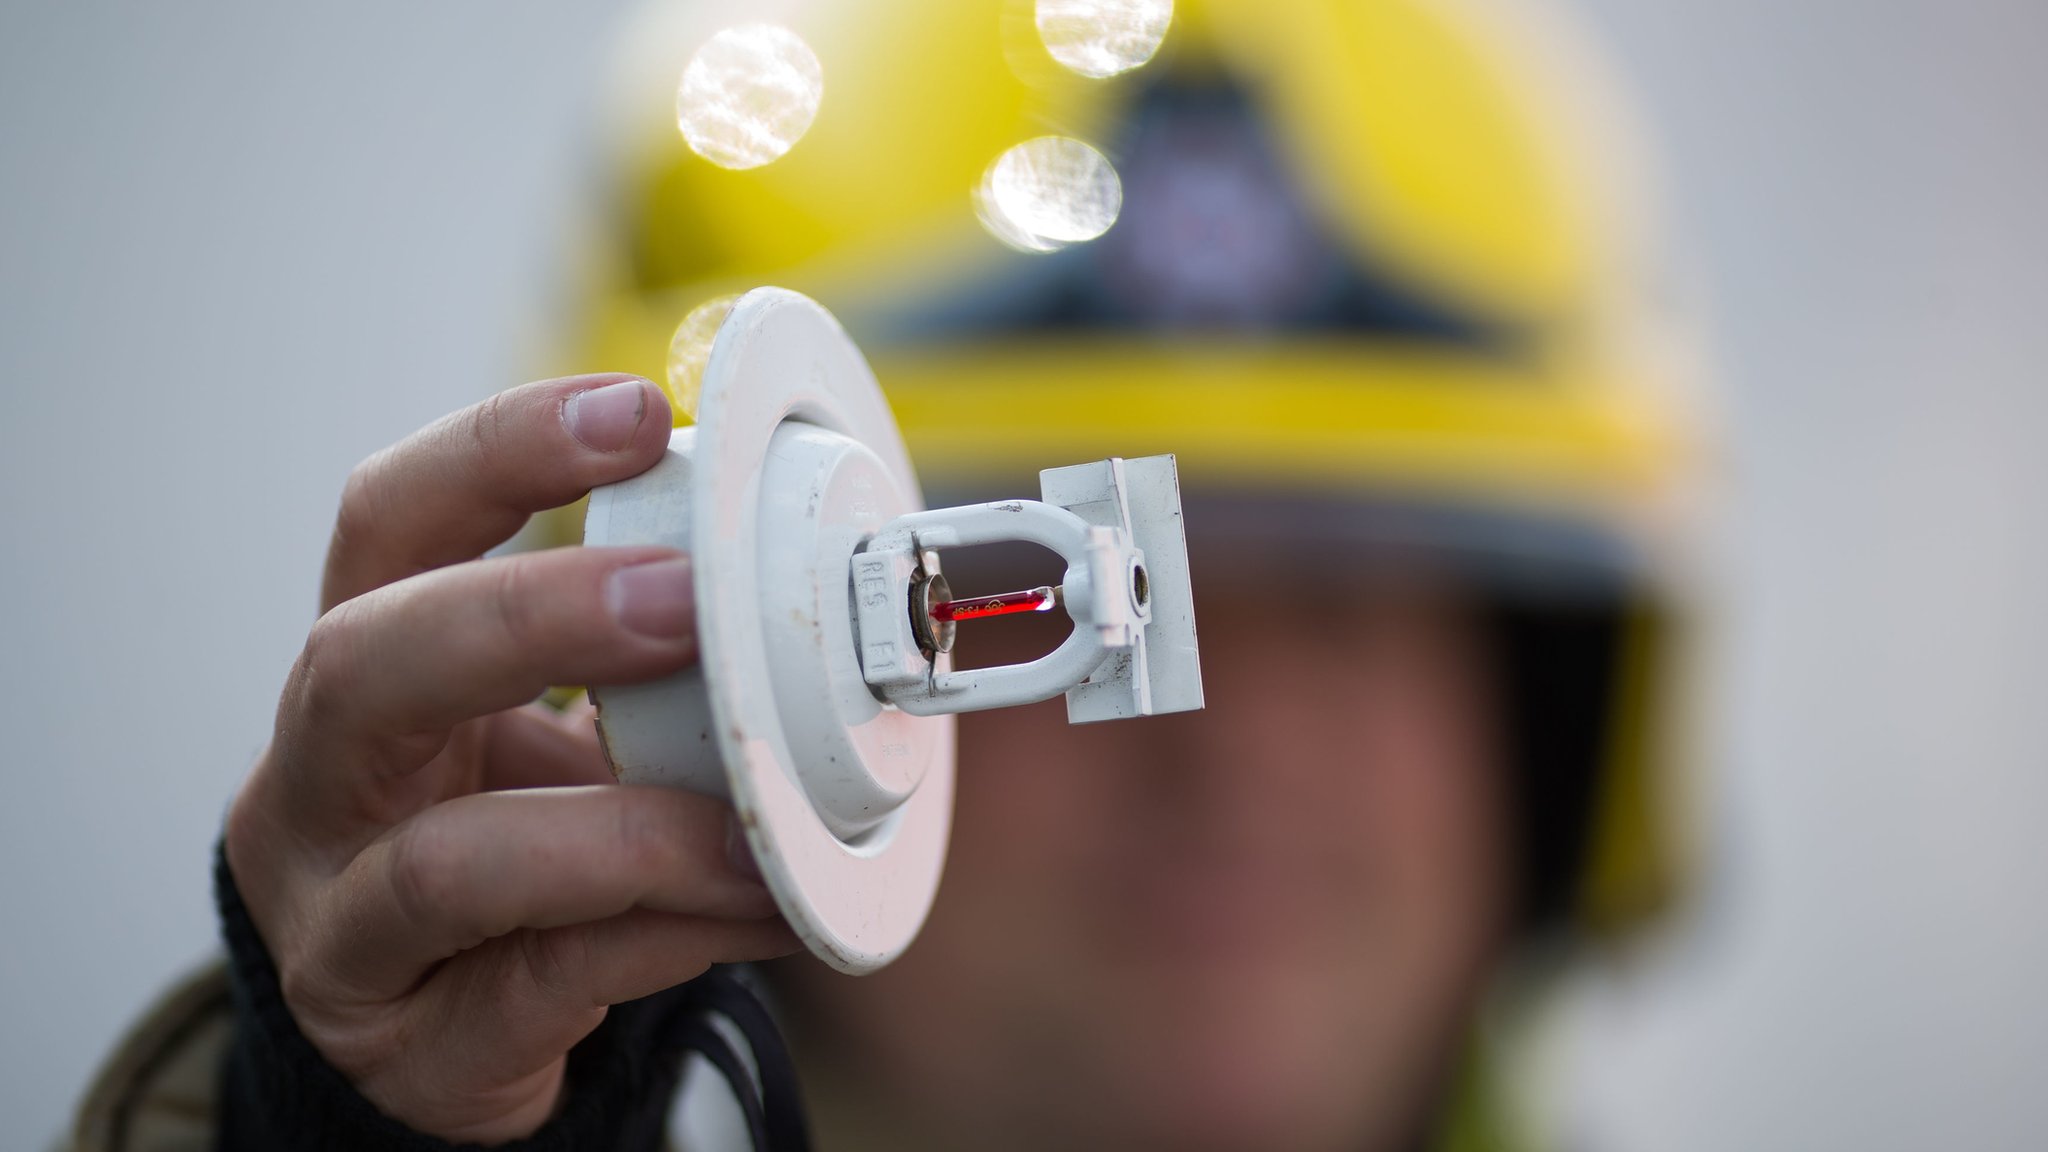 Just 15% of new schools fitted with fire sprinklers